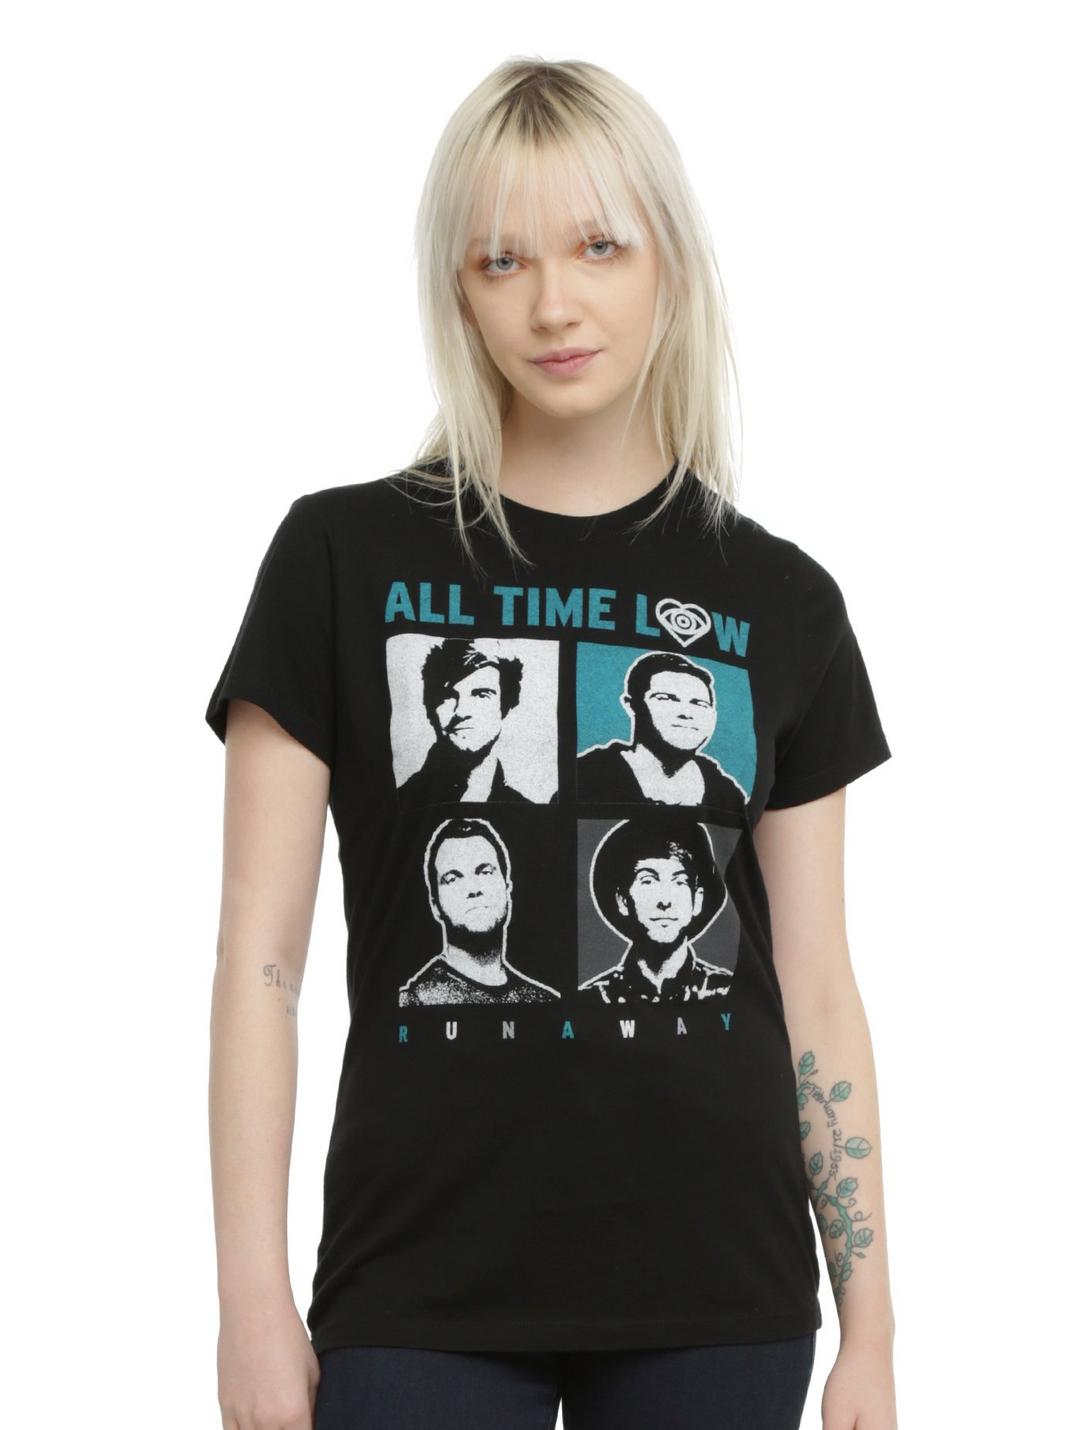 All Time Low Runaway Faces Girls T-Shirt, BLACK, hi-res